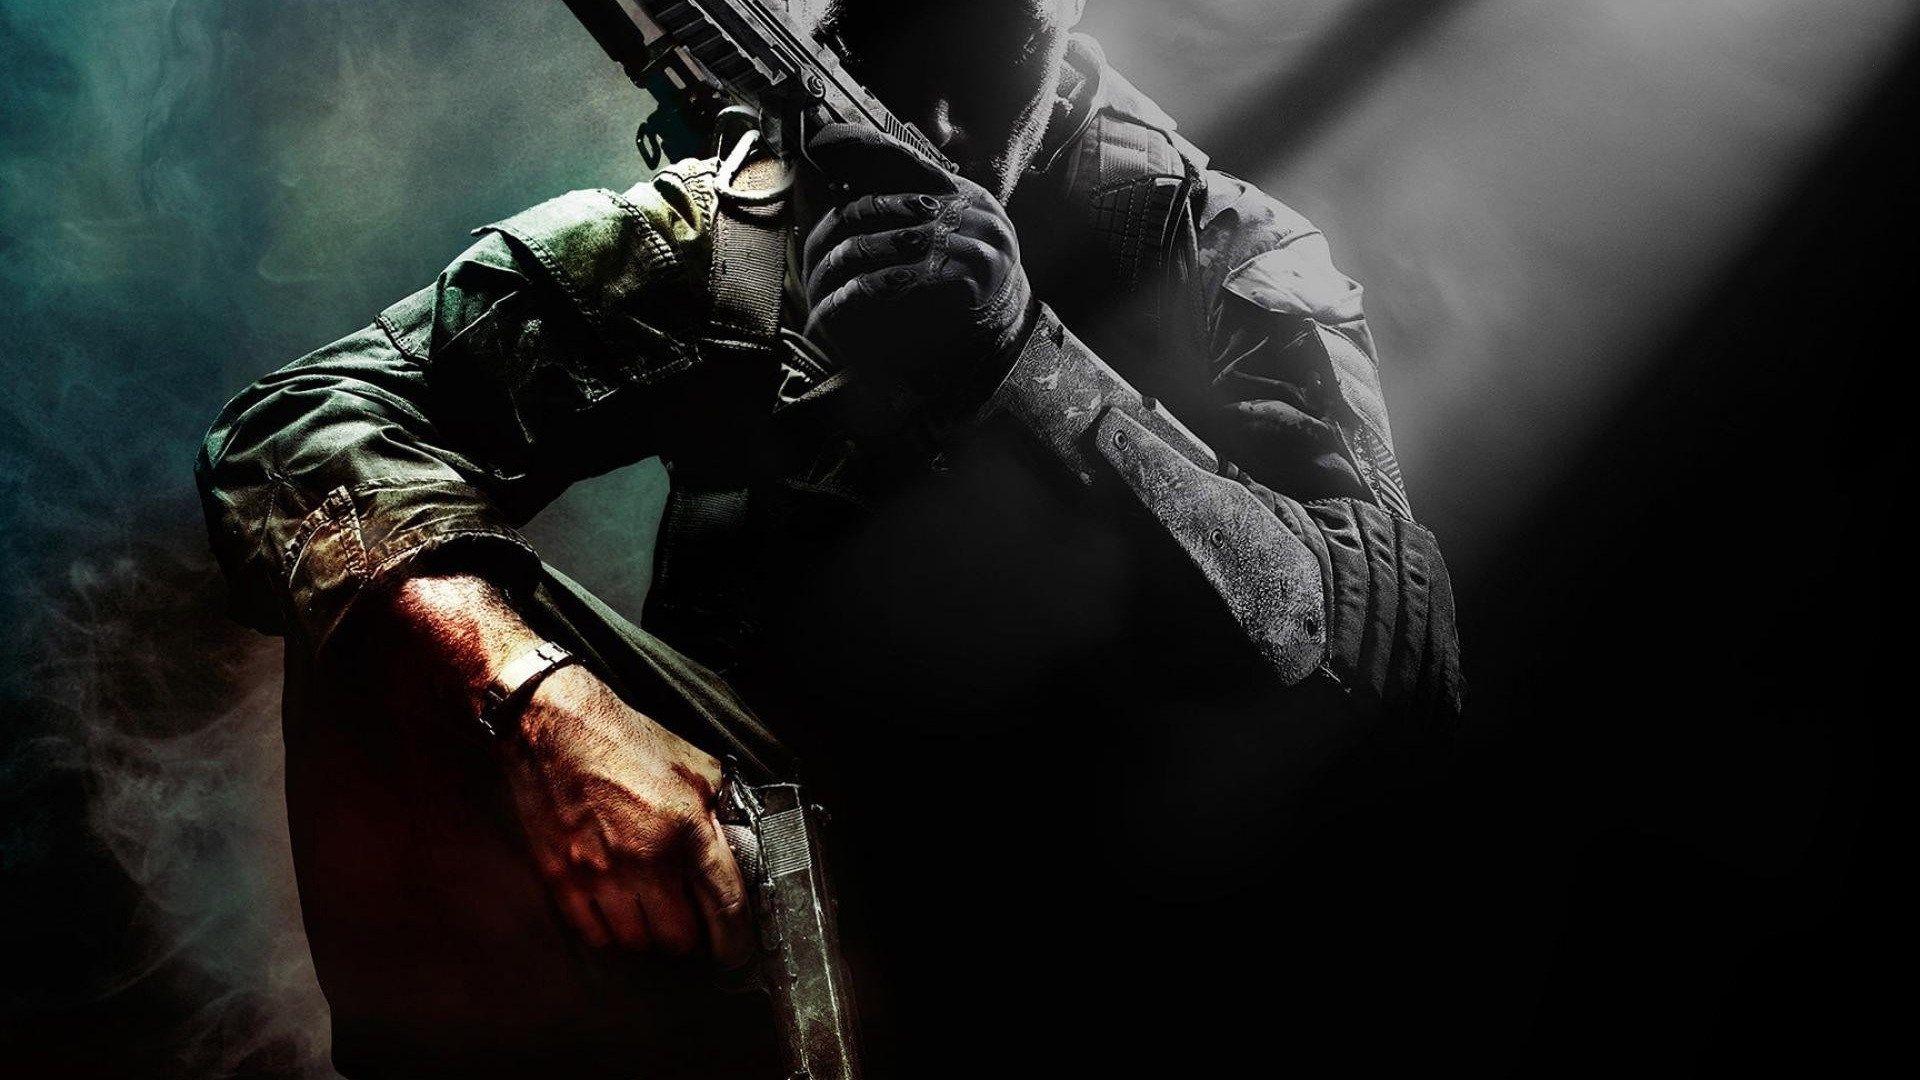 call of duty computer wallpaper. Black ops, Best zombie